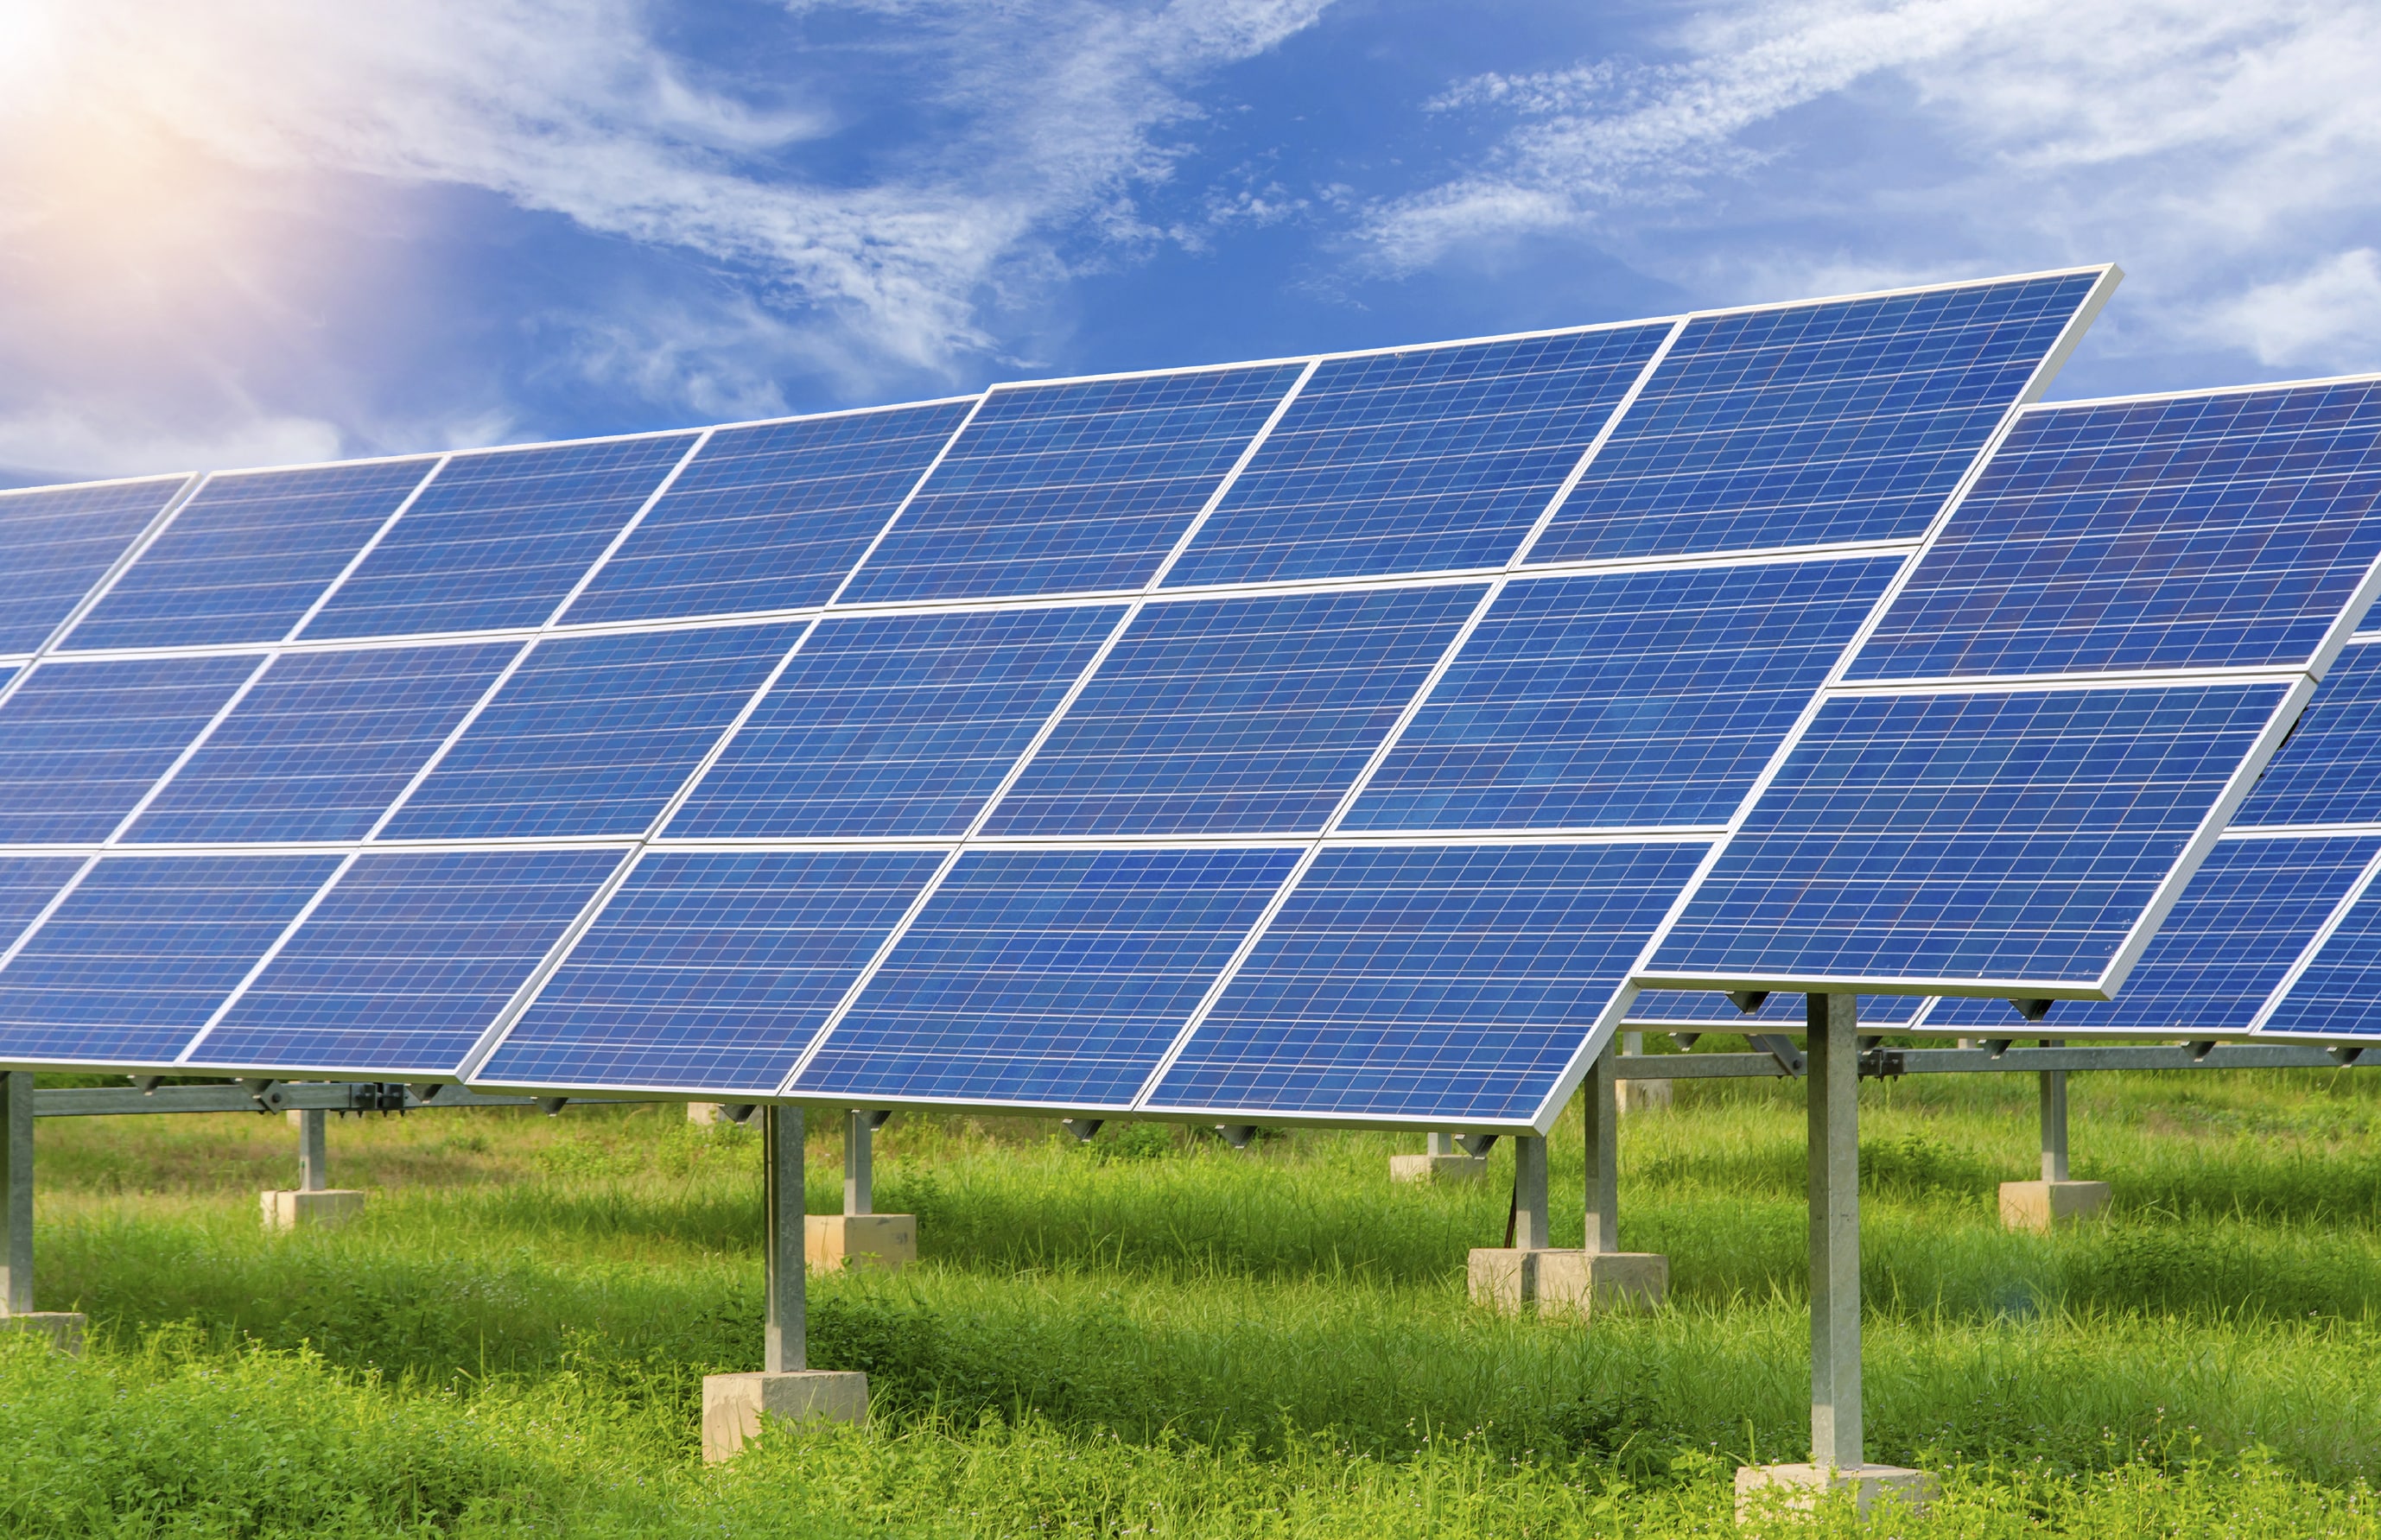 Transformers for Renewable Energy Applications